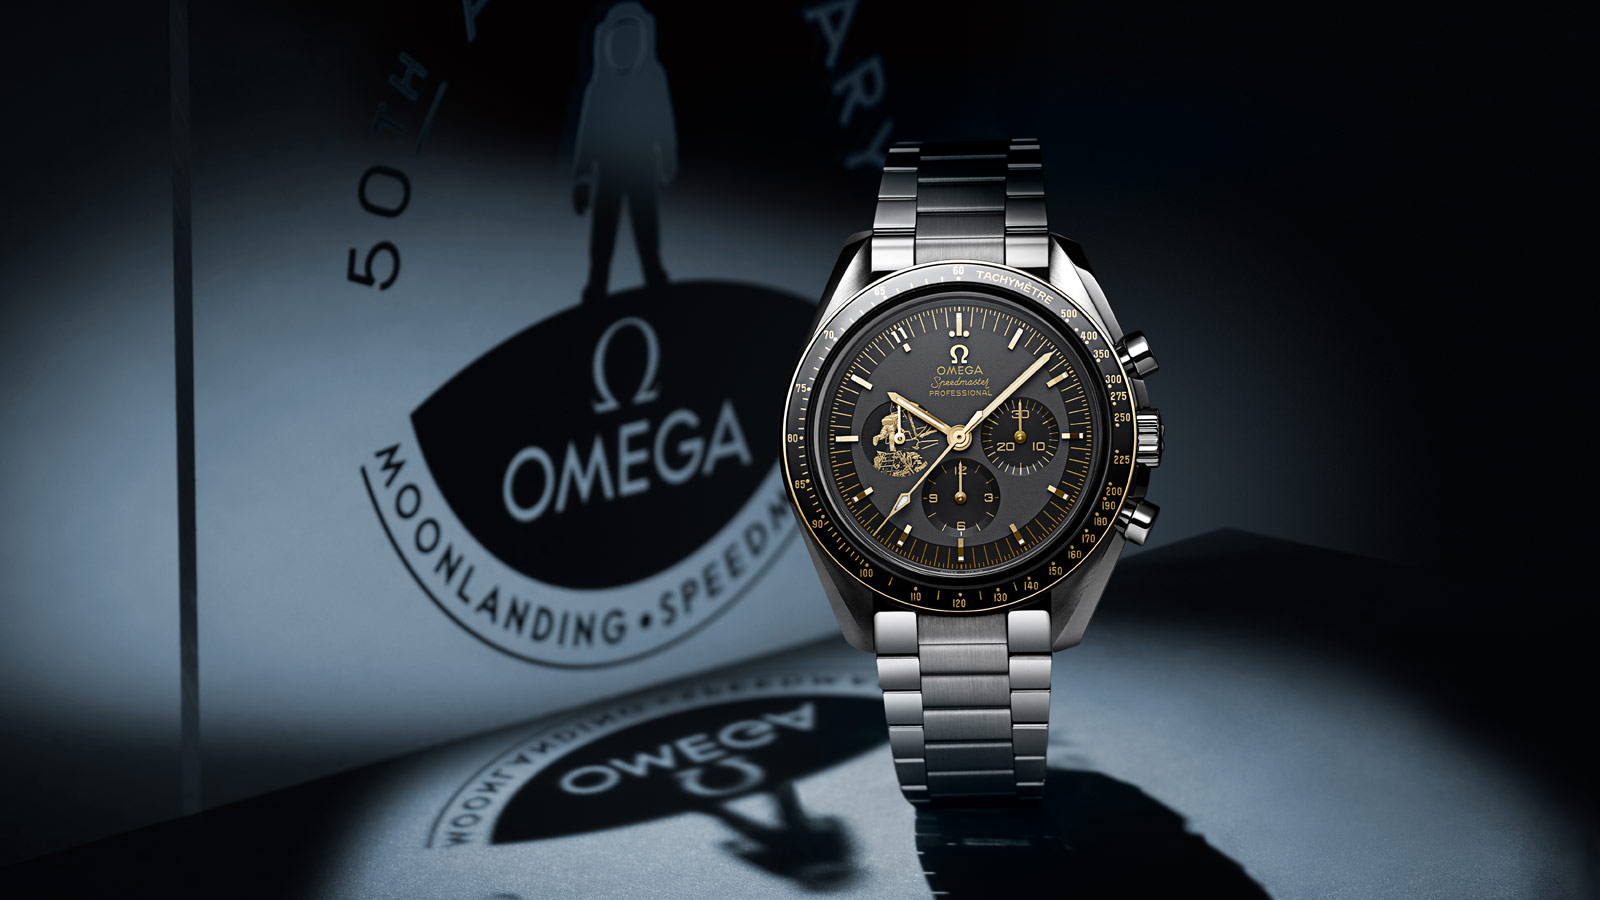 Introducing The Omega Speedmaster Apollo 11 50th Anniversary Limited  Edition Watch – WristReview.com – Featuring Watch Reviews, Critiques,  Reports & News